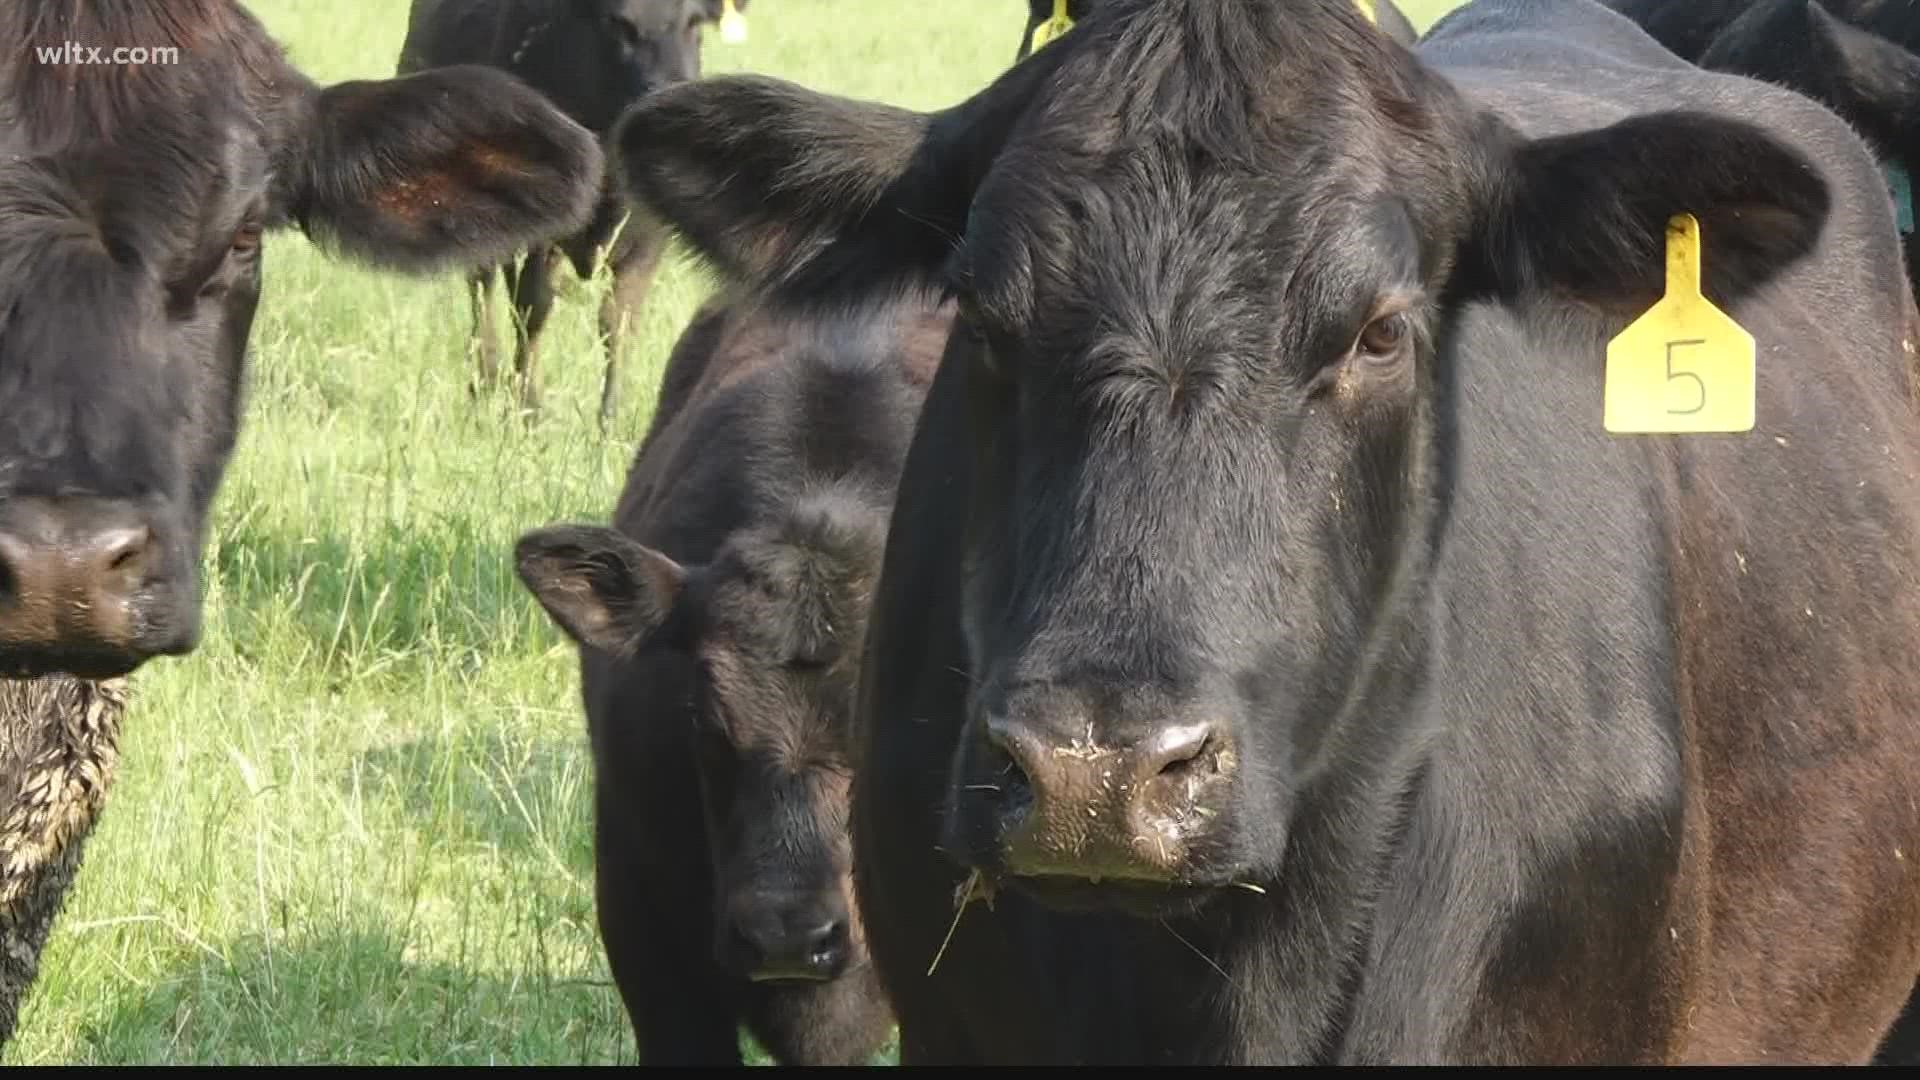 South Carolina's more than 700 livestock farmers can now apply for grant money to help increase the supply of local meat.